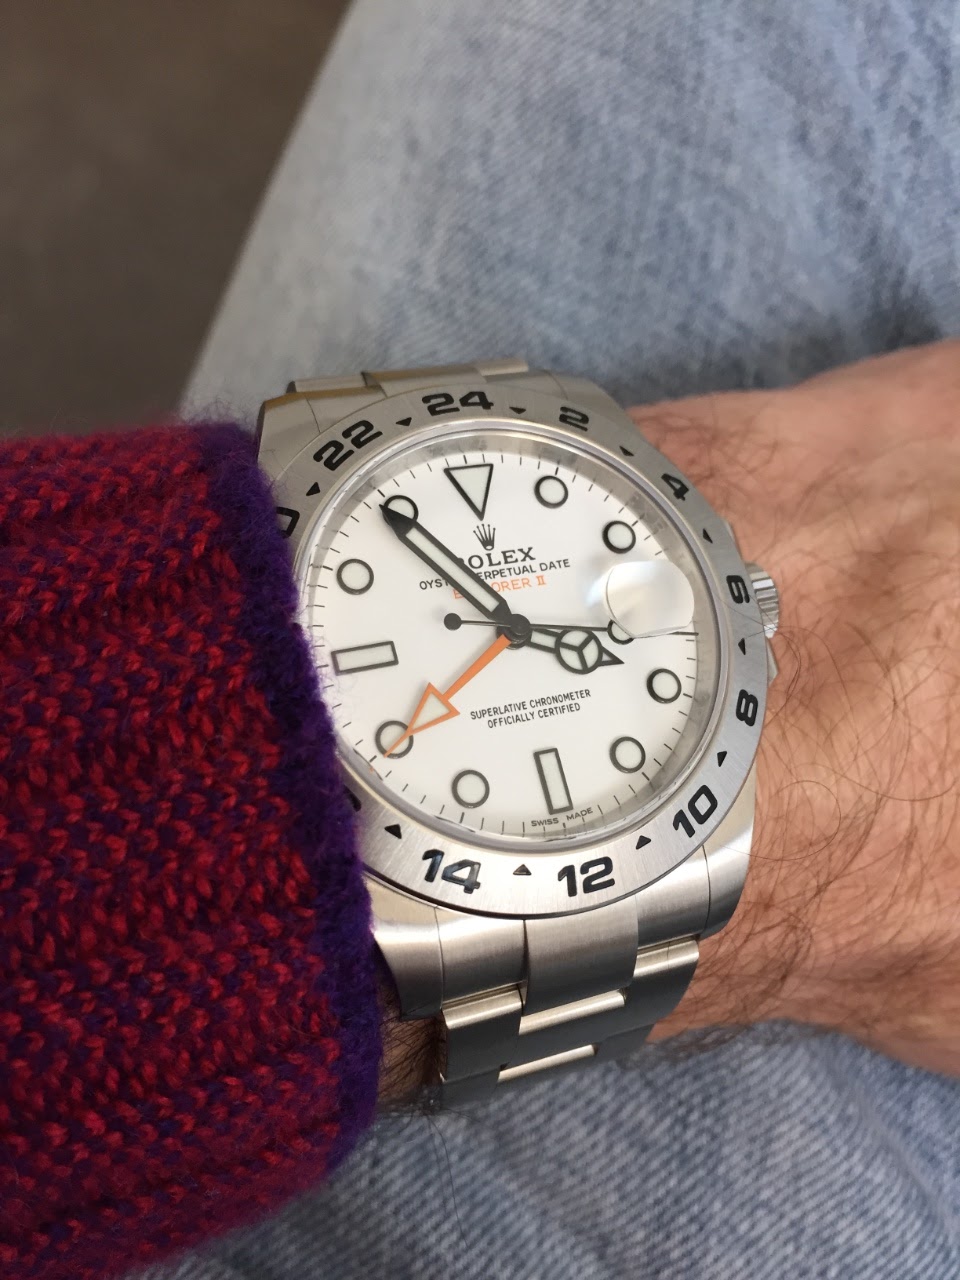 The least popular stainless steel Rolex 